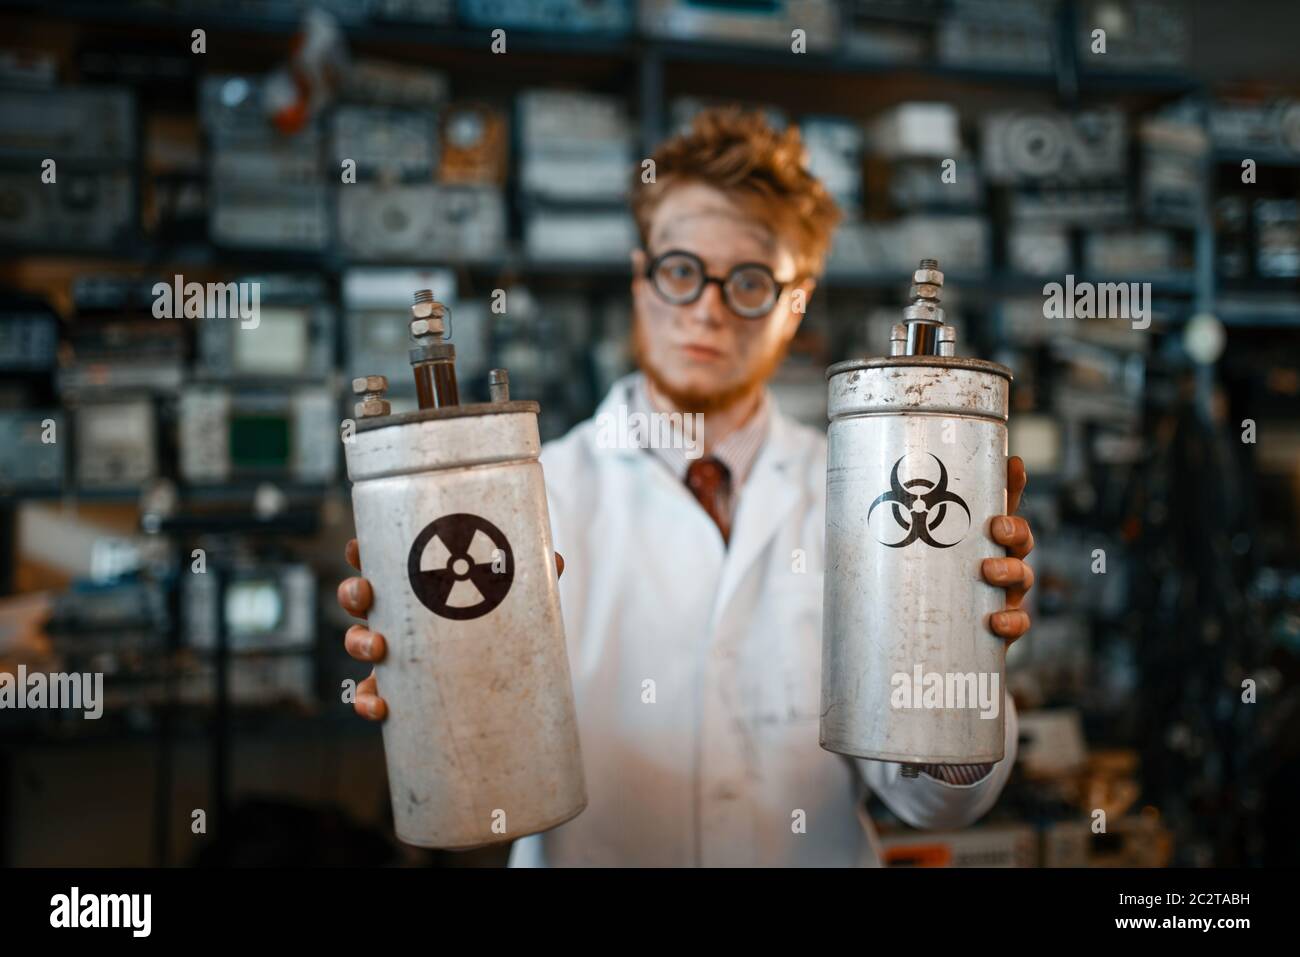 Strange scientist holds radiation materials in his hands, dangerous test in laboratory. Electrical testing tools on background. Lab equipment, enginee Stock Photo